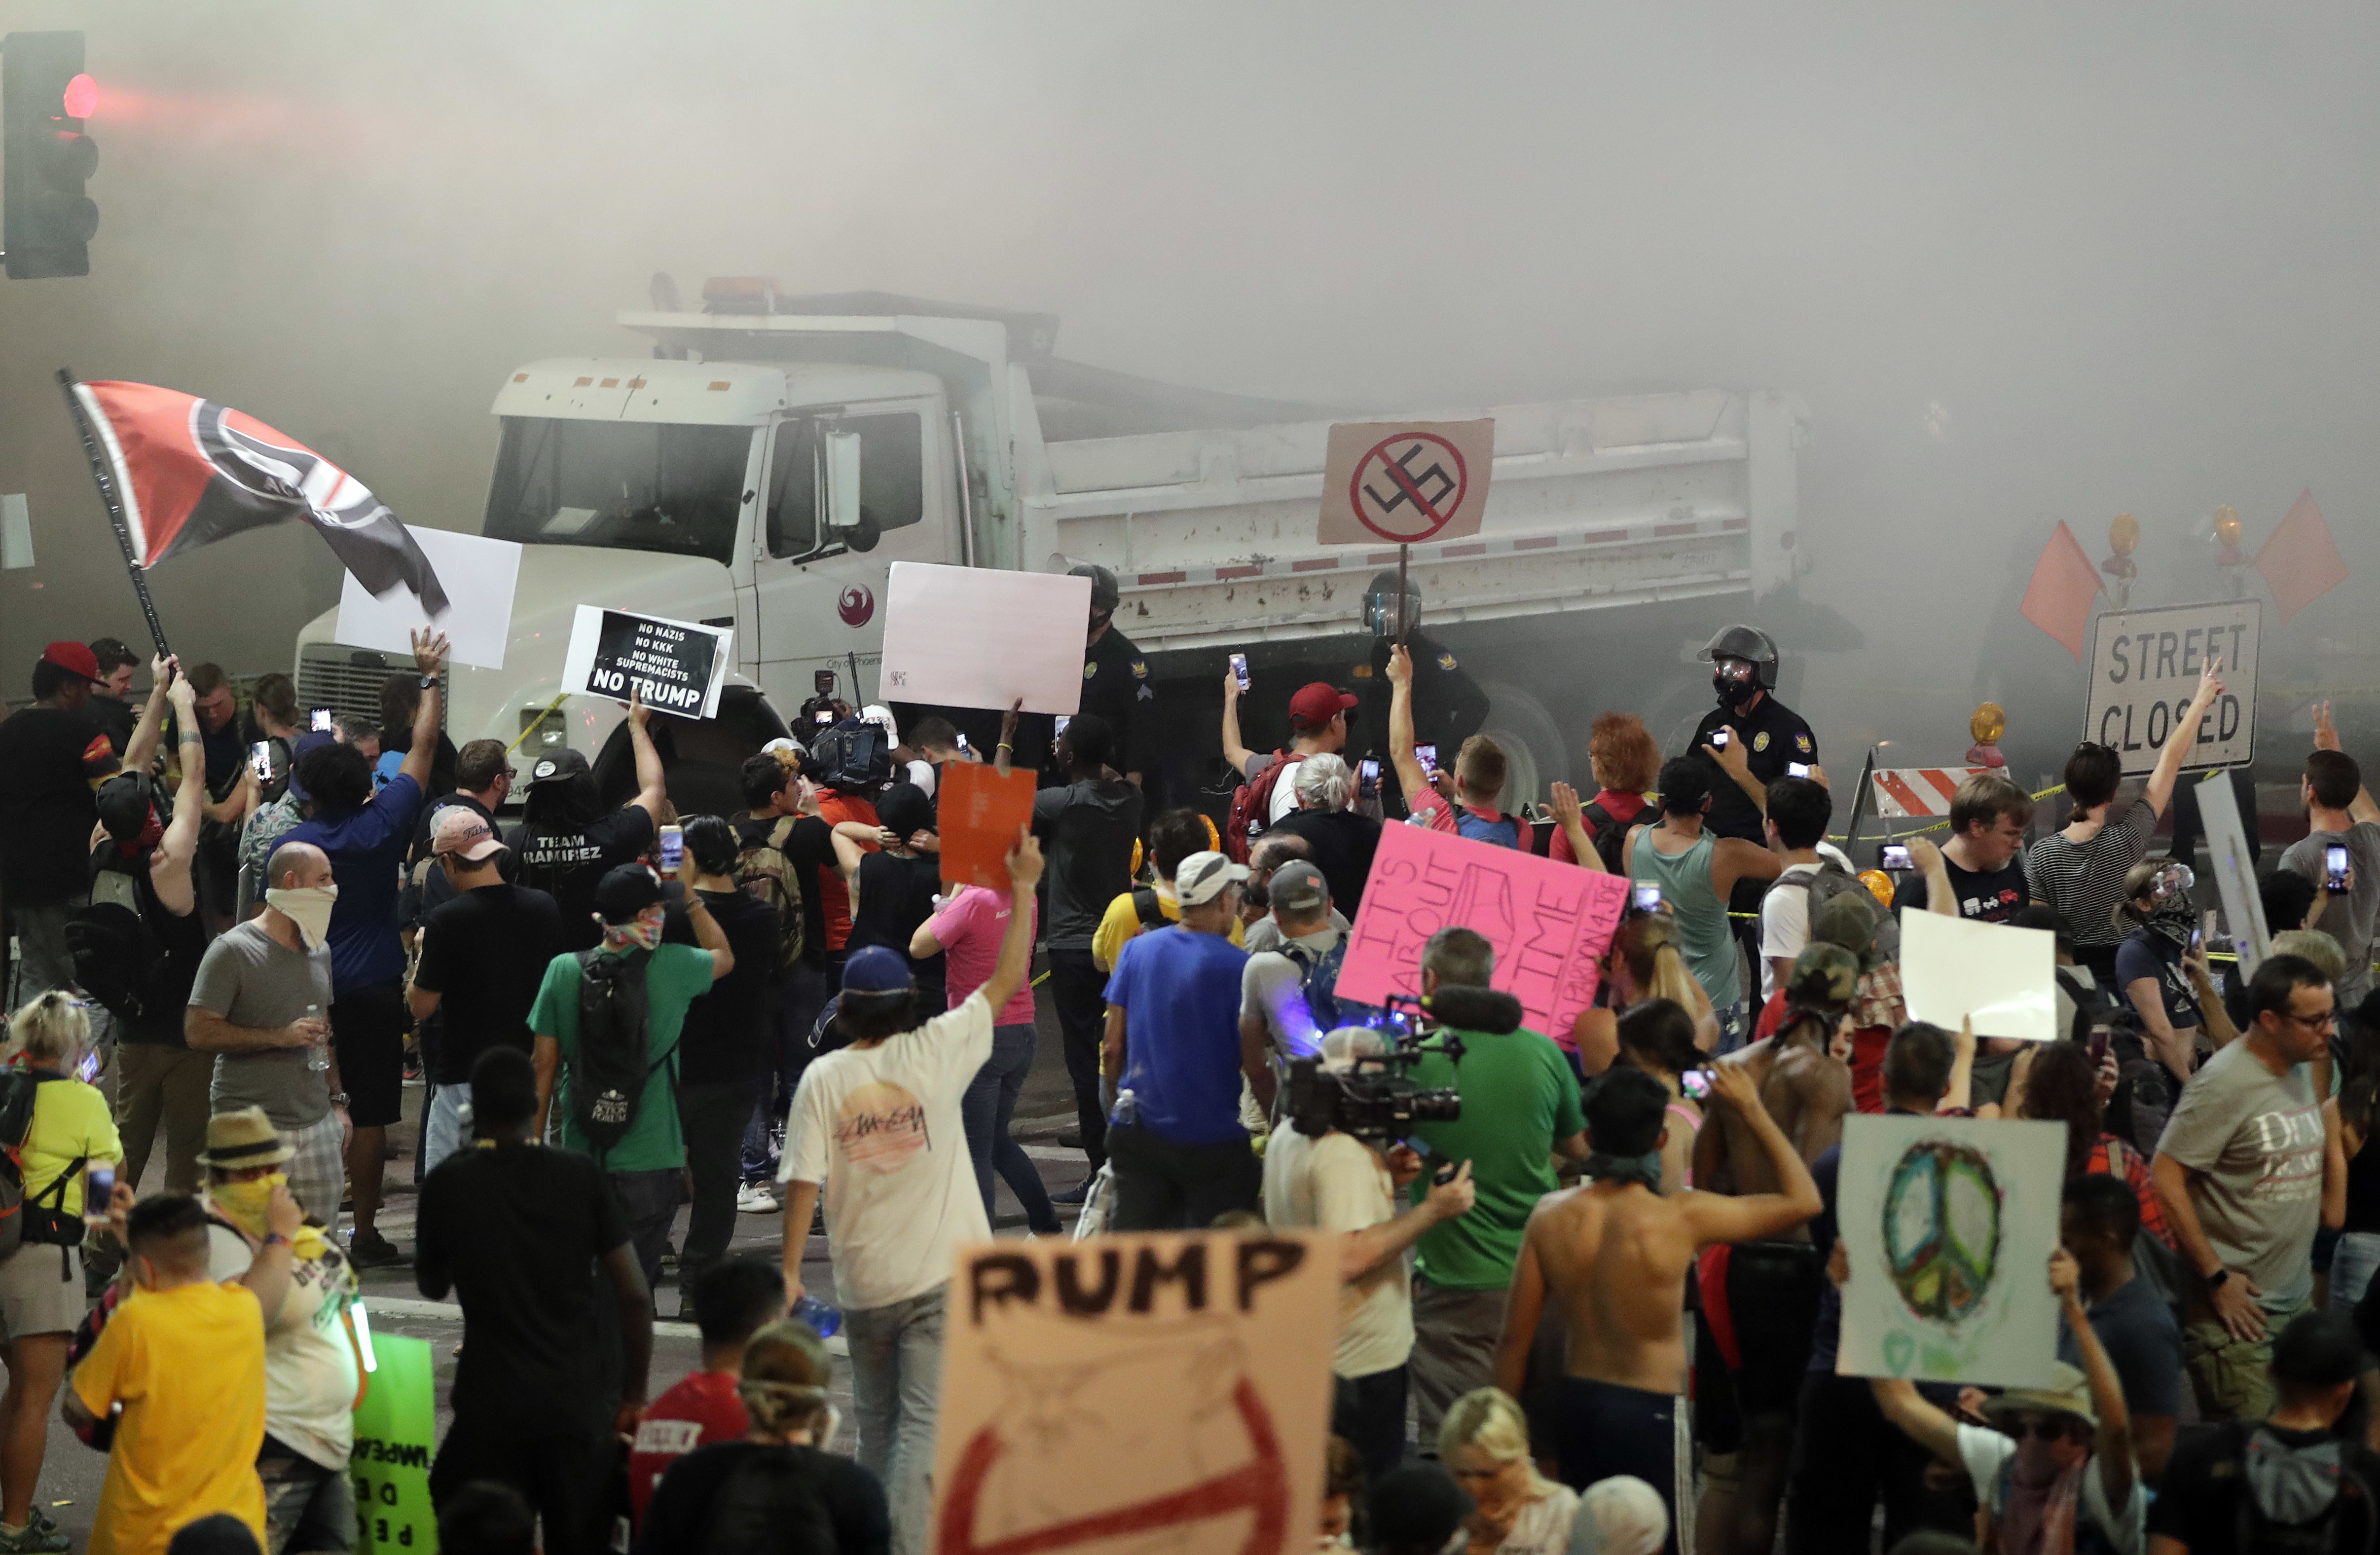 Dramatic pictures show the protests outside Donald Trump’s rally in